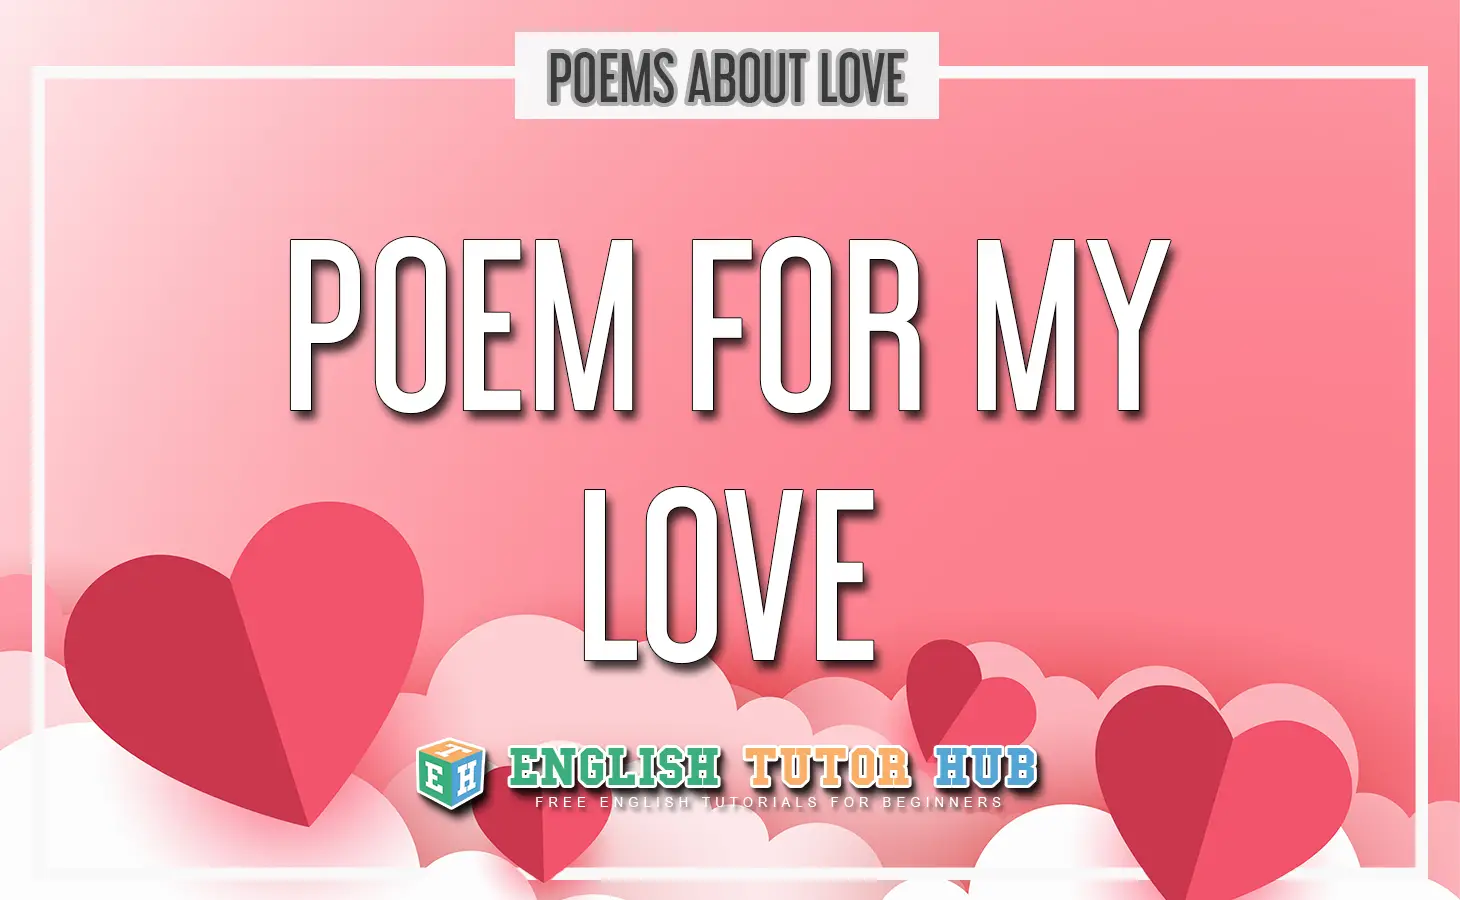 Poem For My Love By June Jordan - Summary and Lesson [2022]